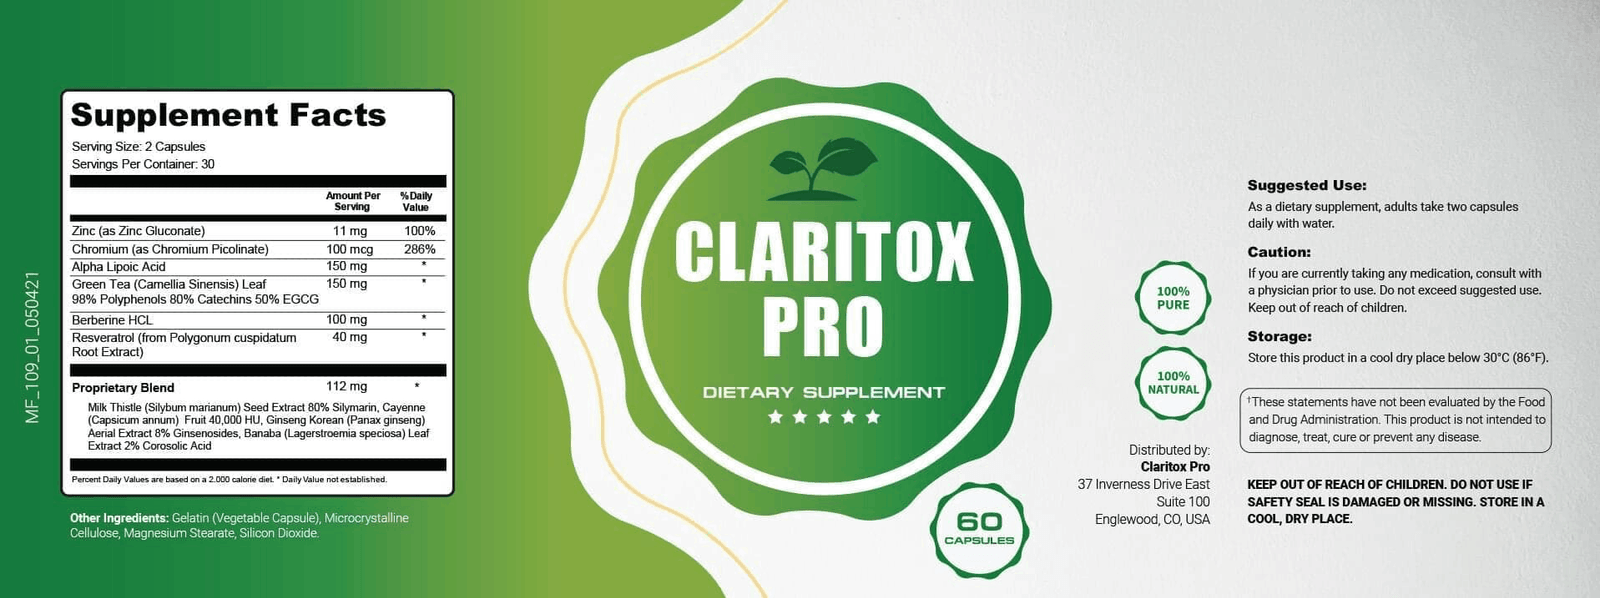 Claritox-Pro-Supplement-facts